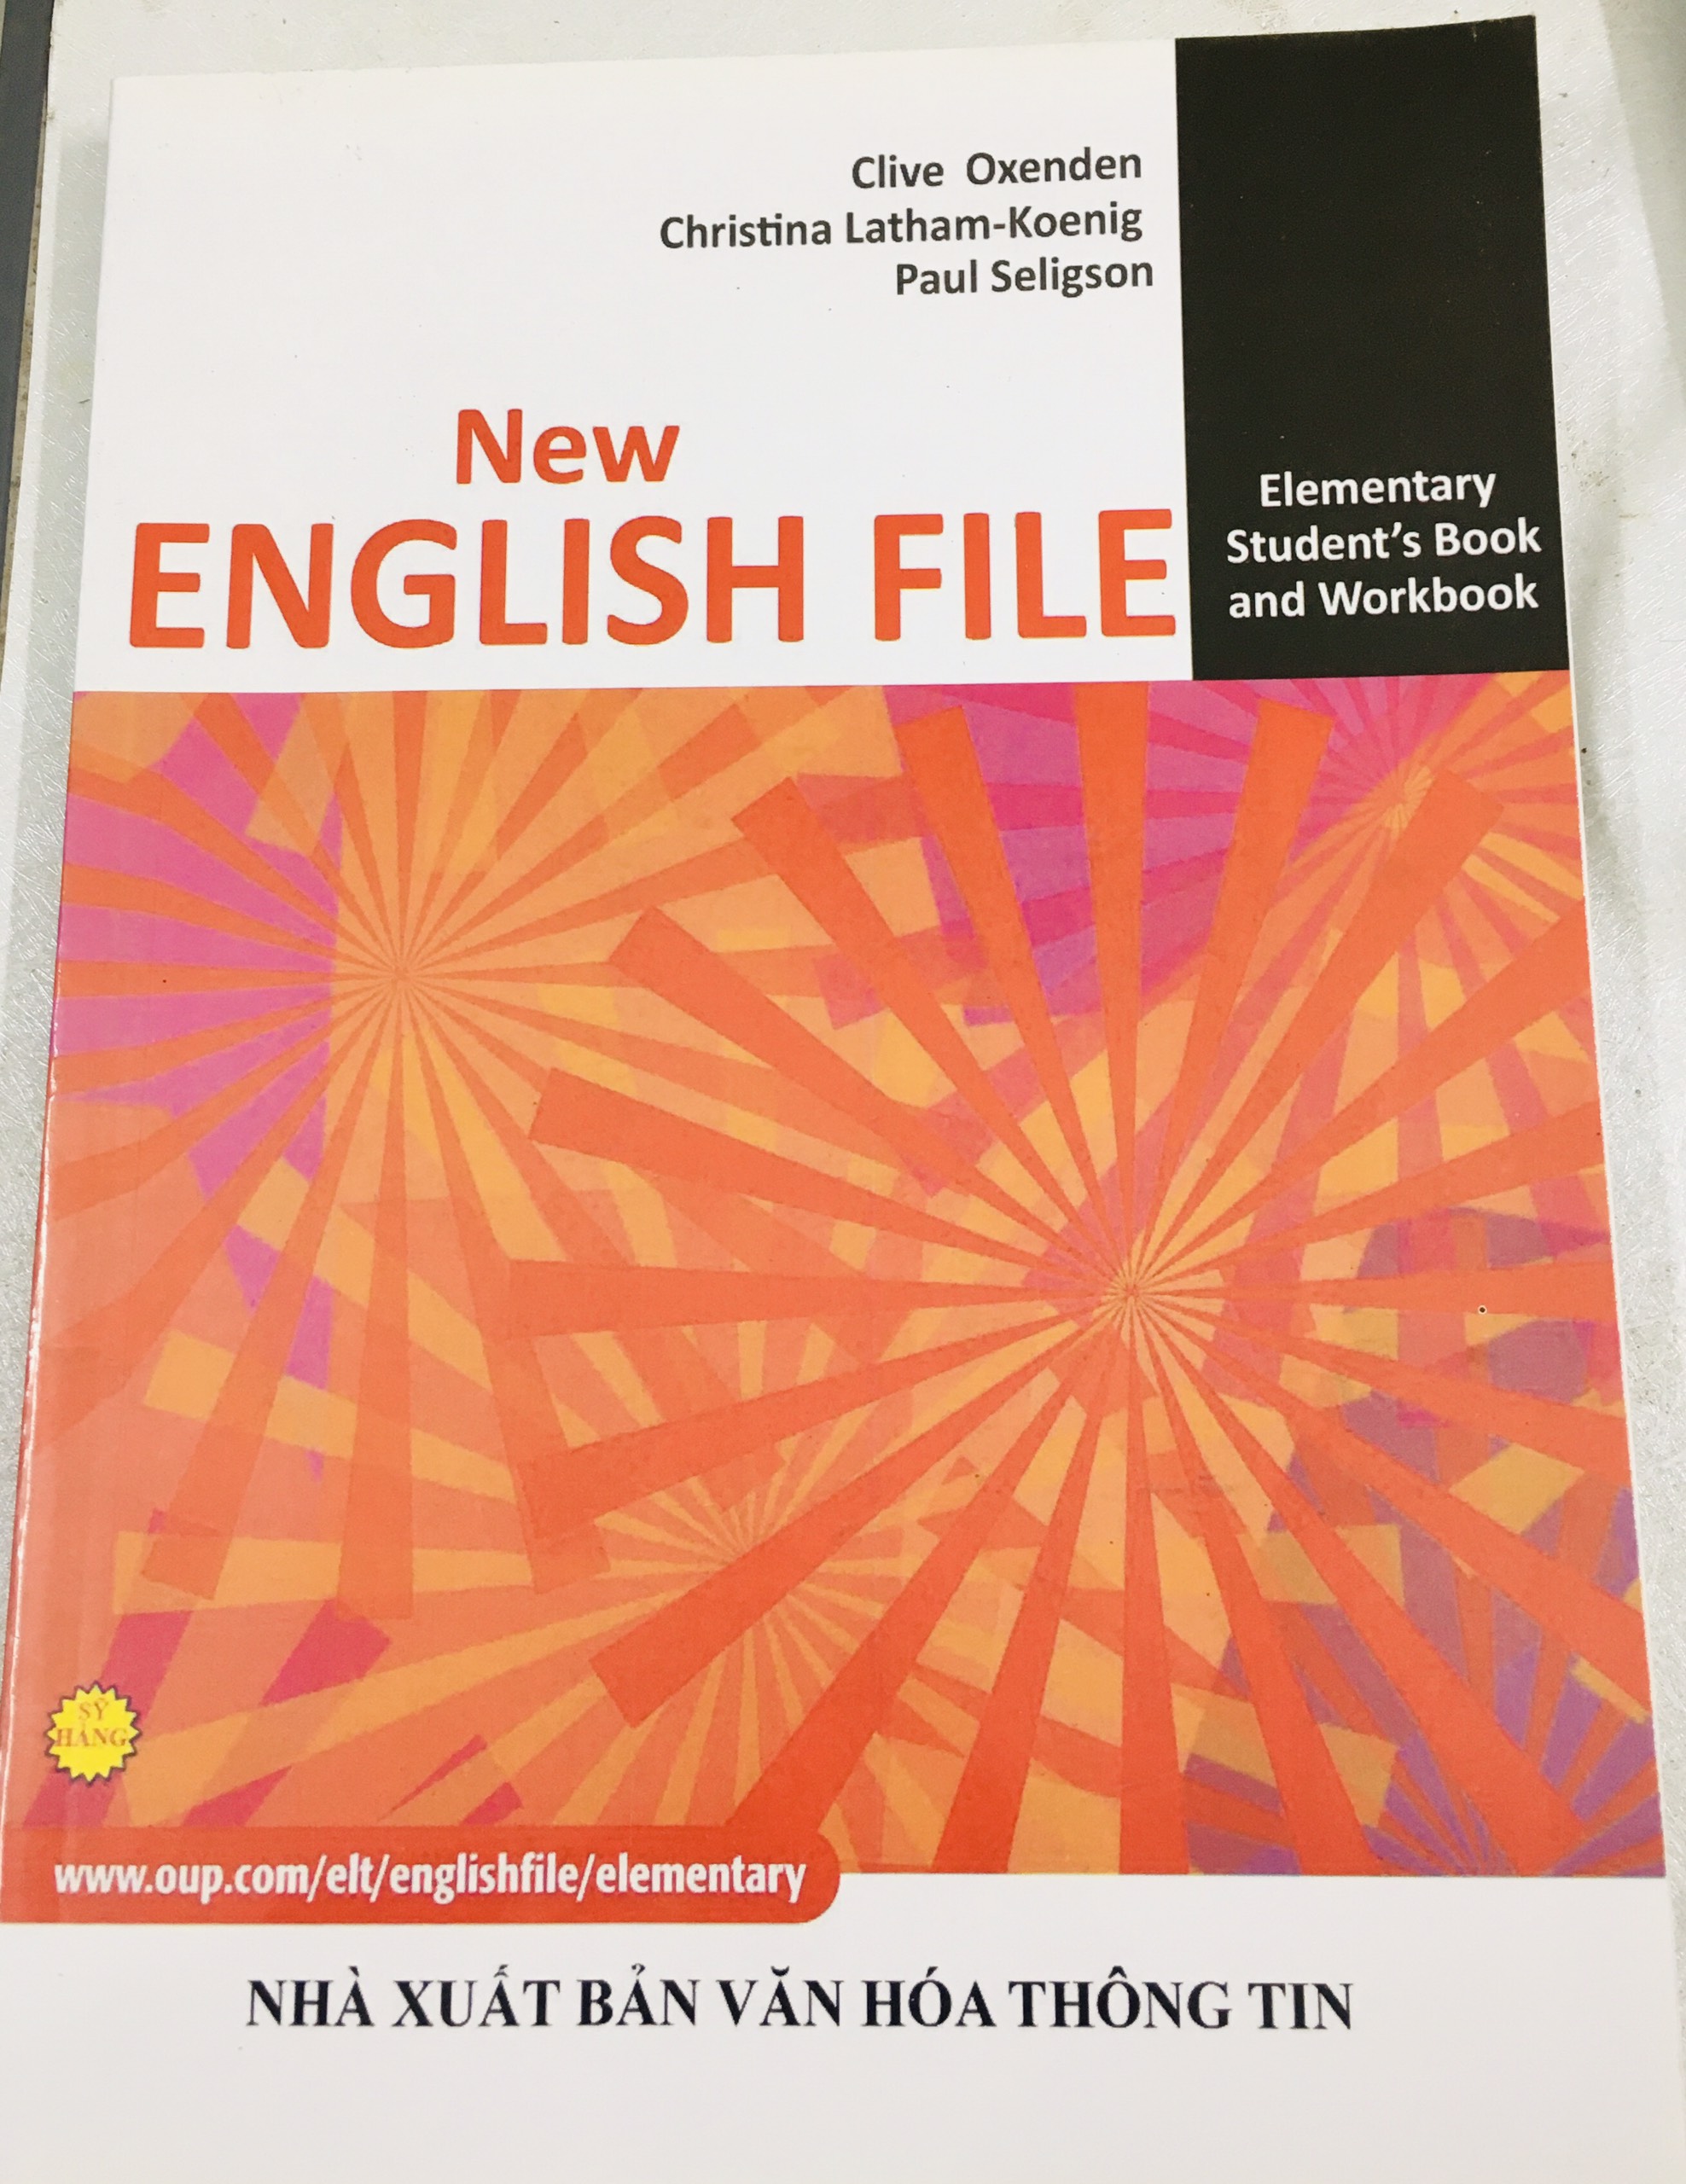 Sách : New English File - Elementary Student's Book anh Workbook